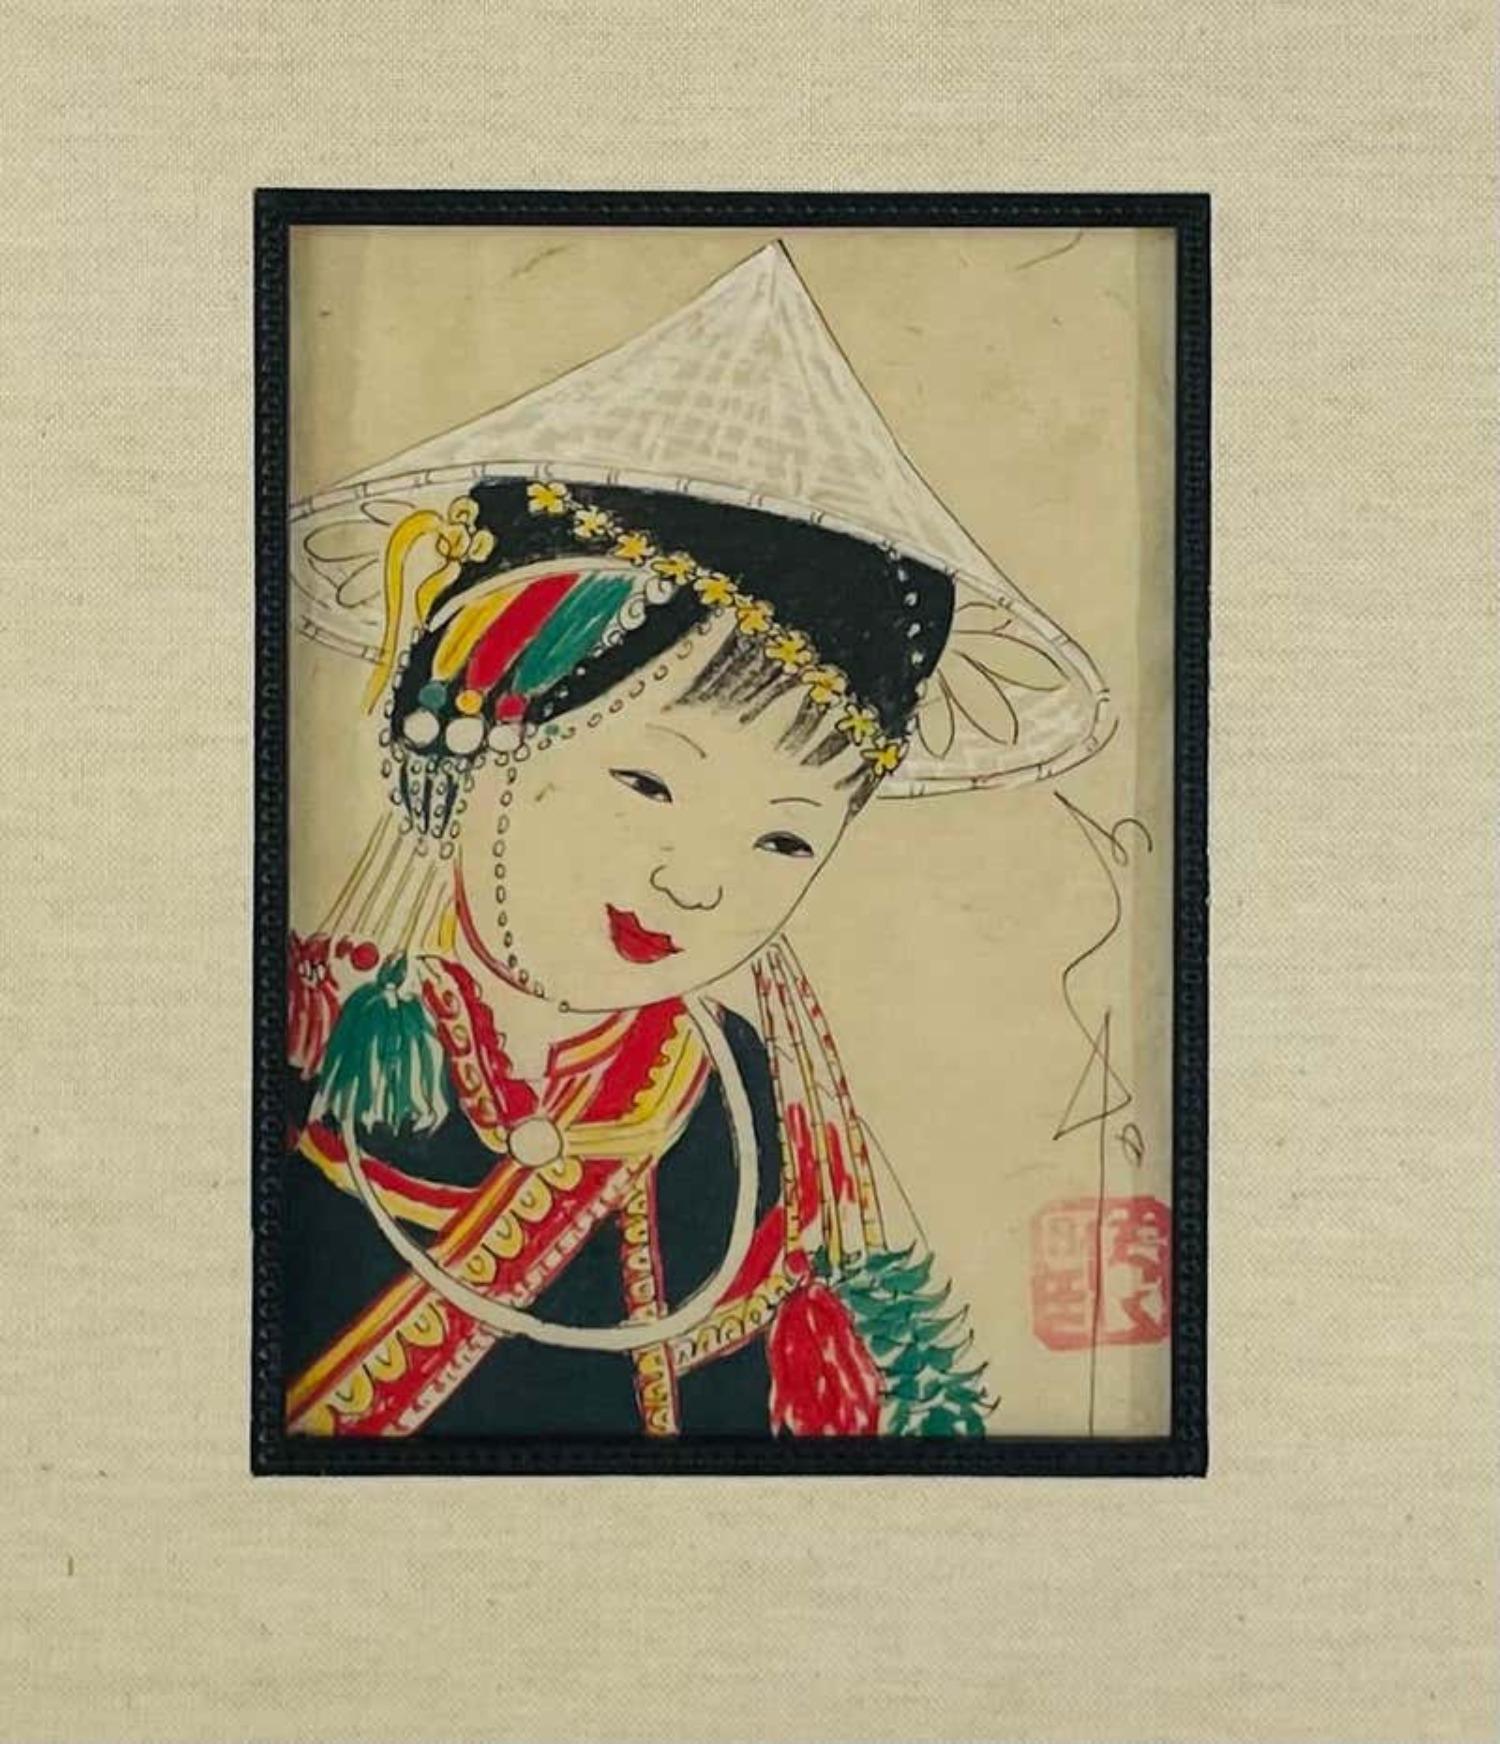 A pair of antique colored etching prints each depicting a Japanese woman. One woman is wearing the conical hat also known as the rice hat and a traditional colorful outfit. The second portrait presents also a Japanese woman wearing large red hat and